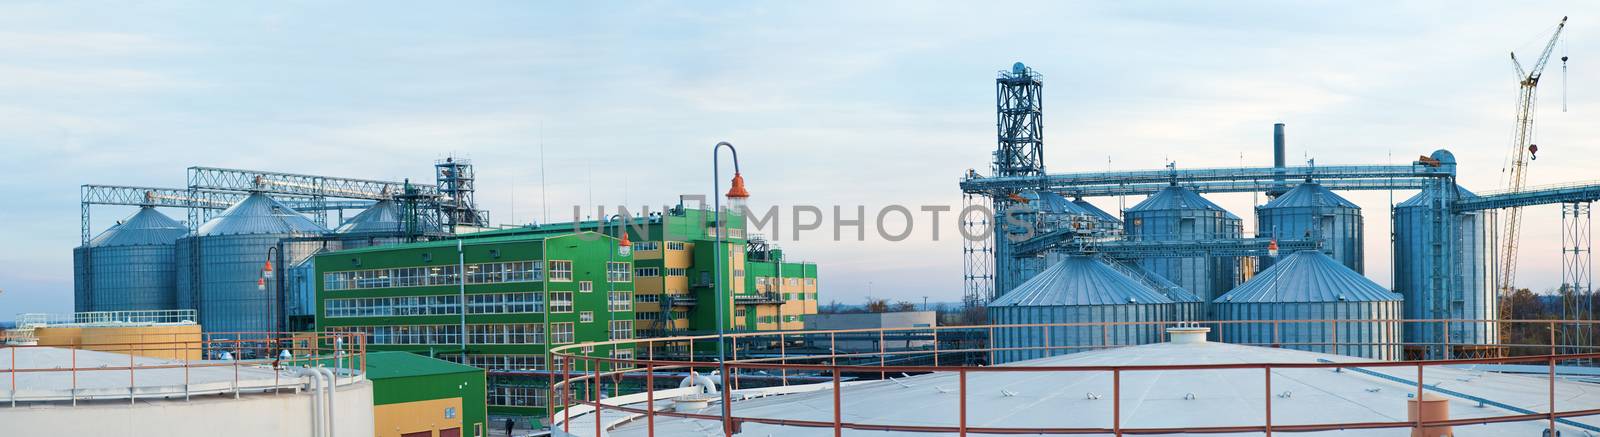 Towers of grain drying enterprise at sunny day by sarymsakov